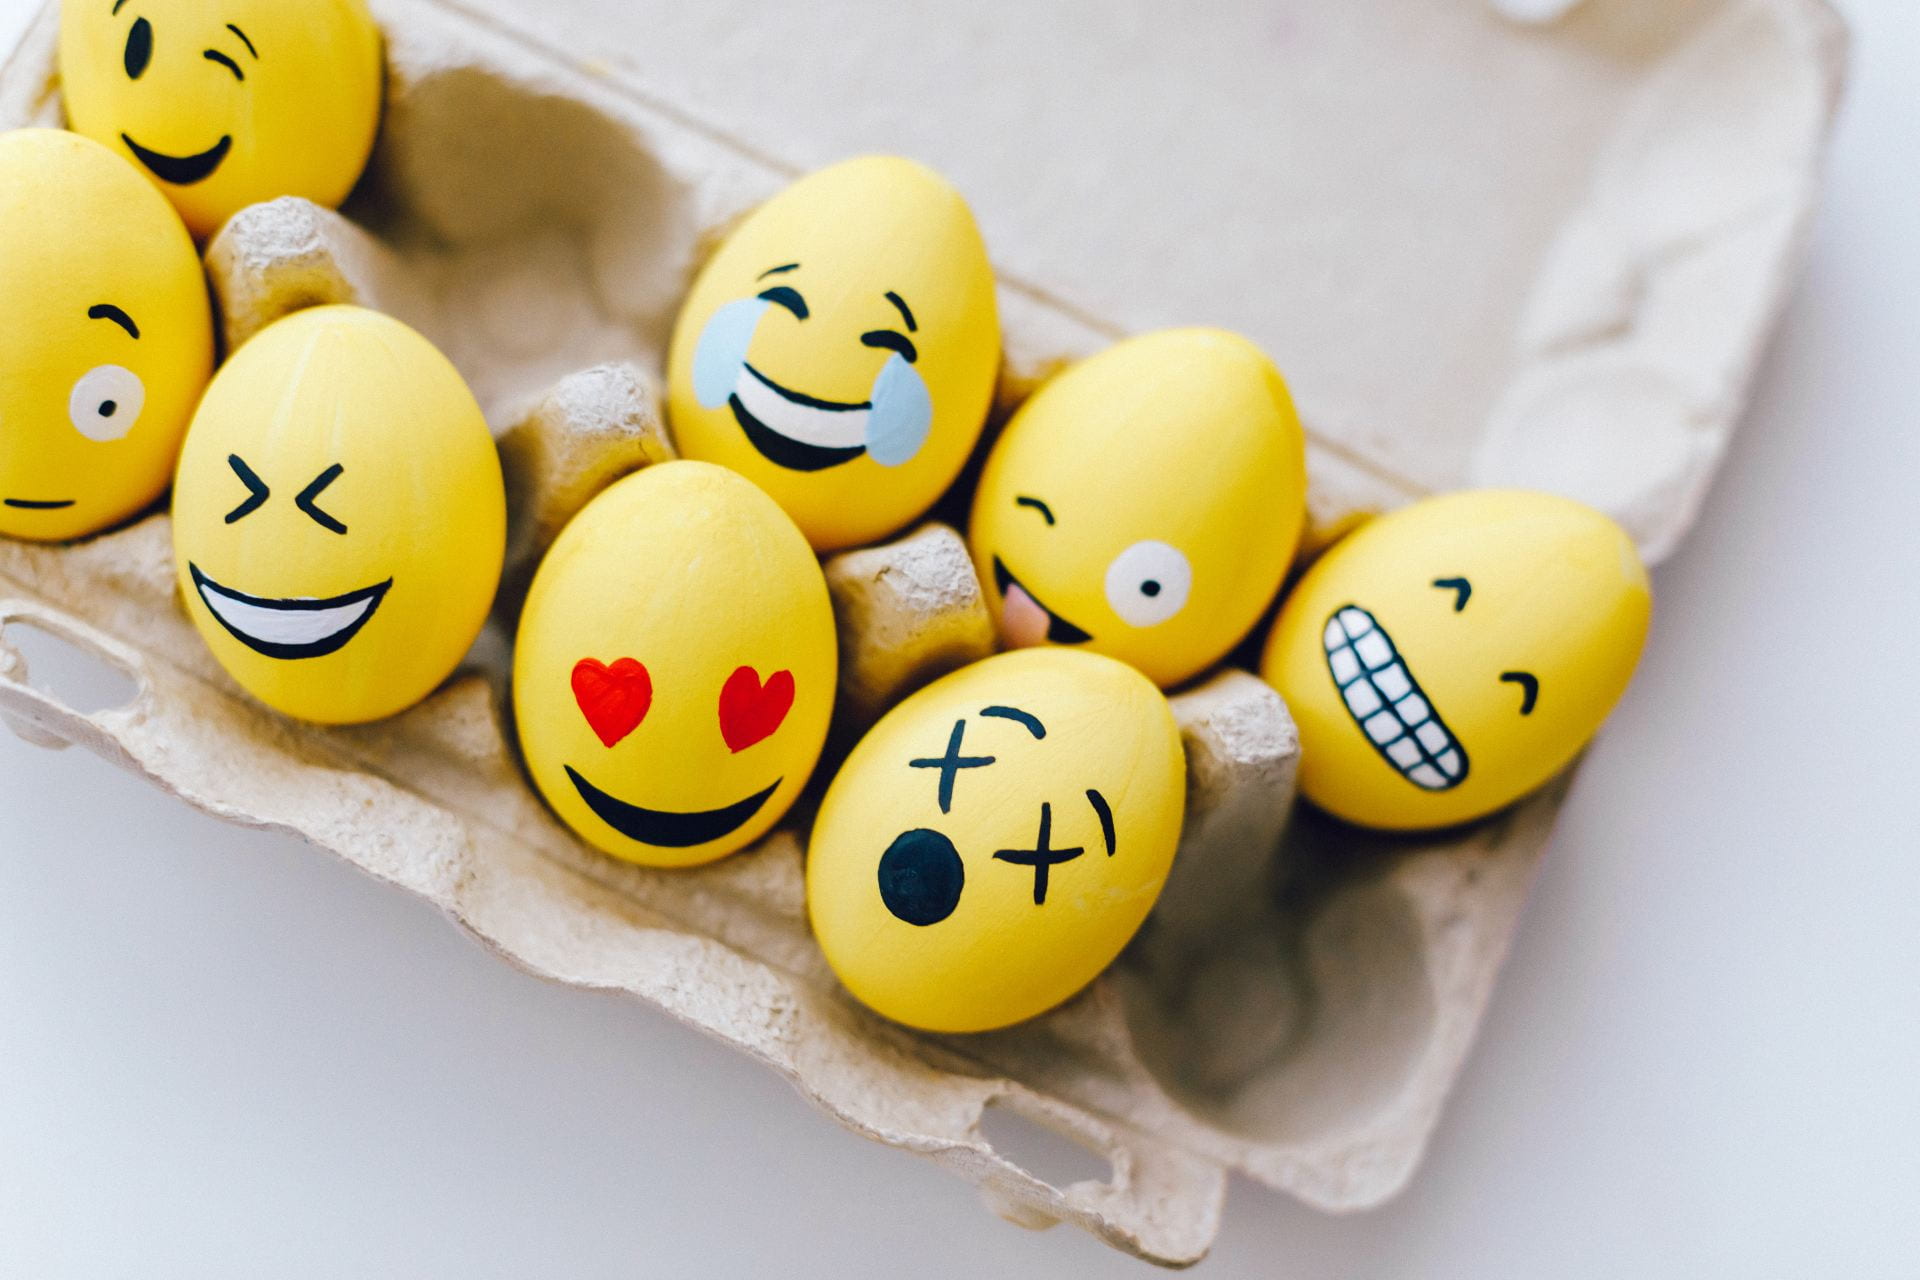 [Alt-text: Yellow painted eggs with various facial expressions.]